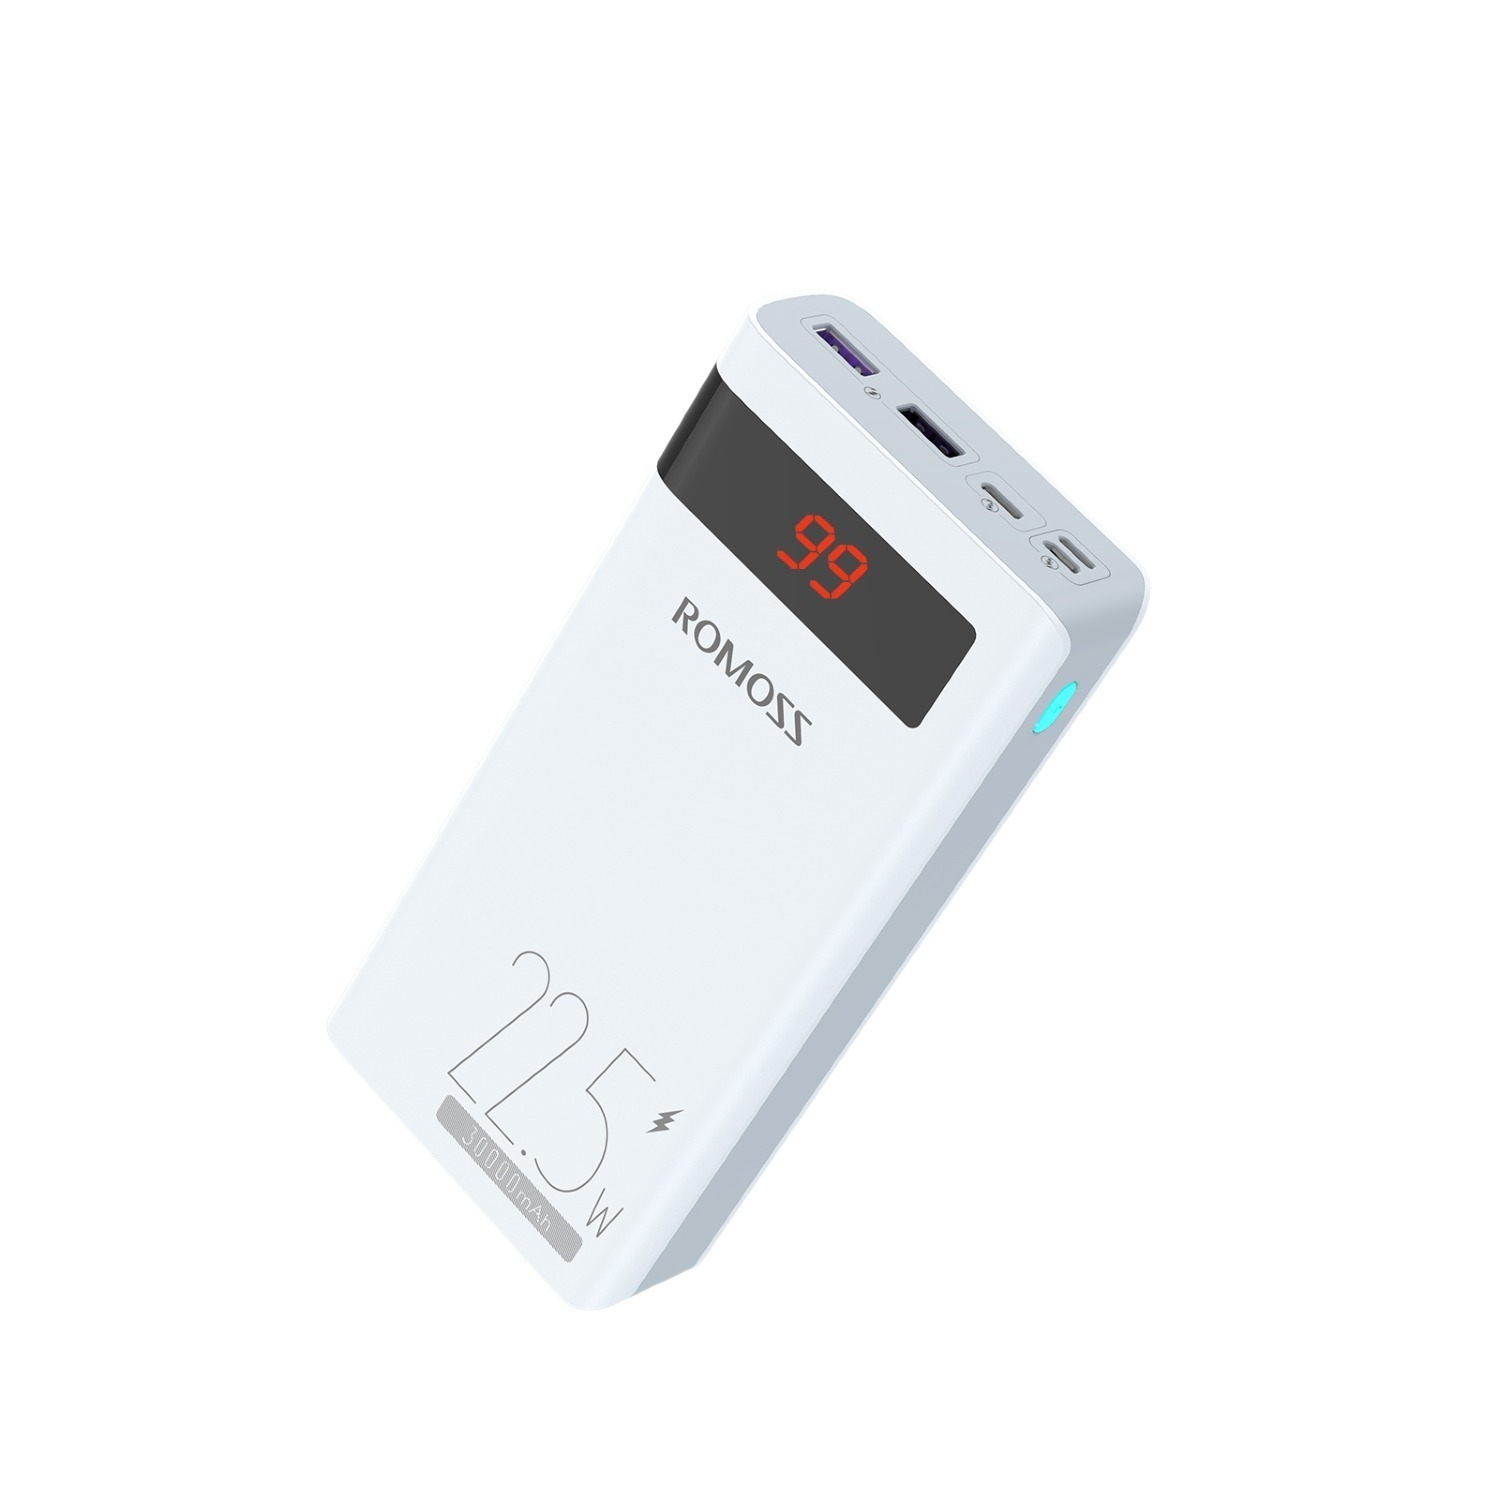 30000mAh Romoss Power Bank w/ QC 22.5W & 20W Type C PD Fast Charge $21 + Free Shipping w/ Prime or orders $35+.